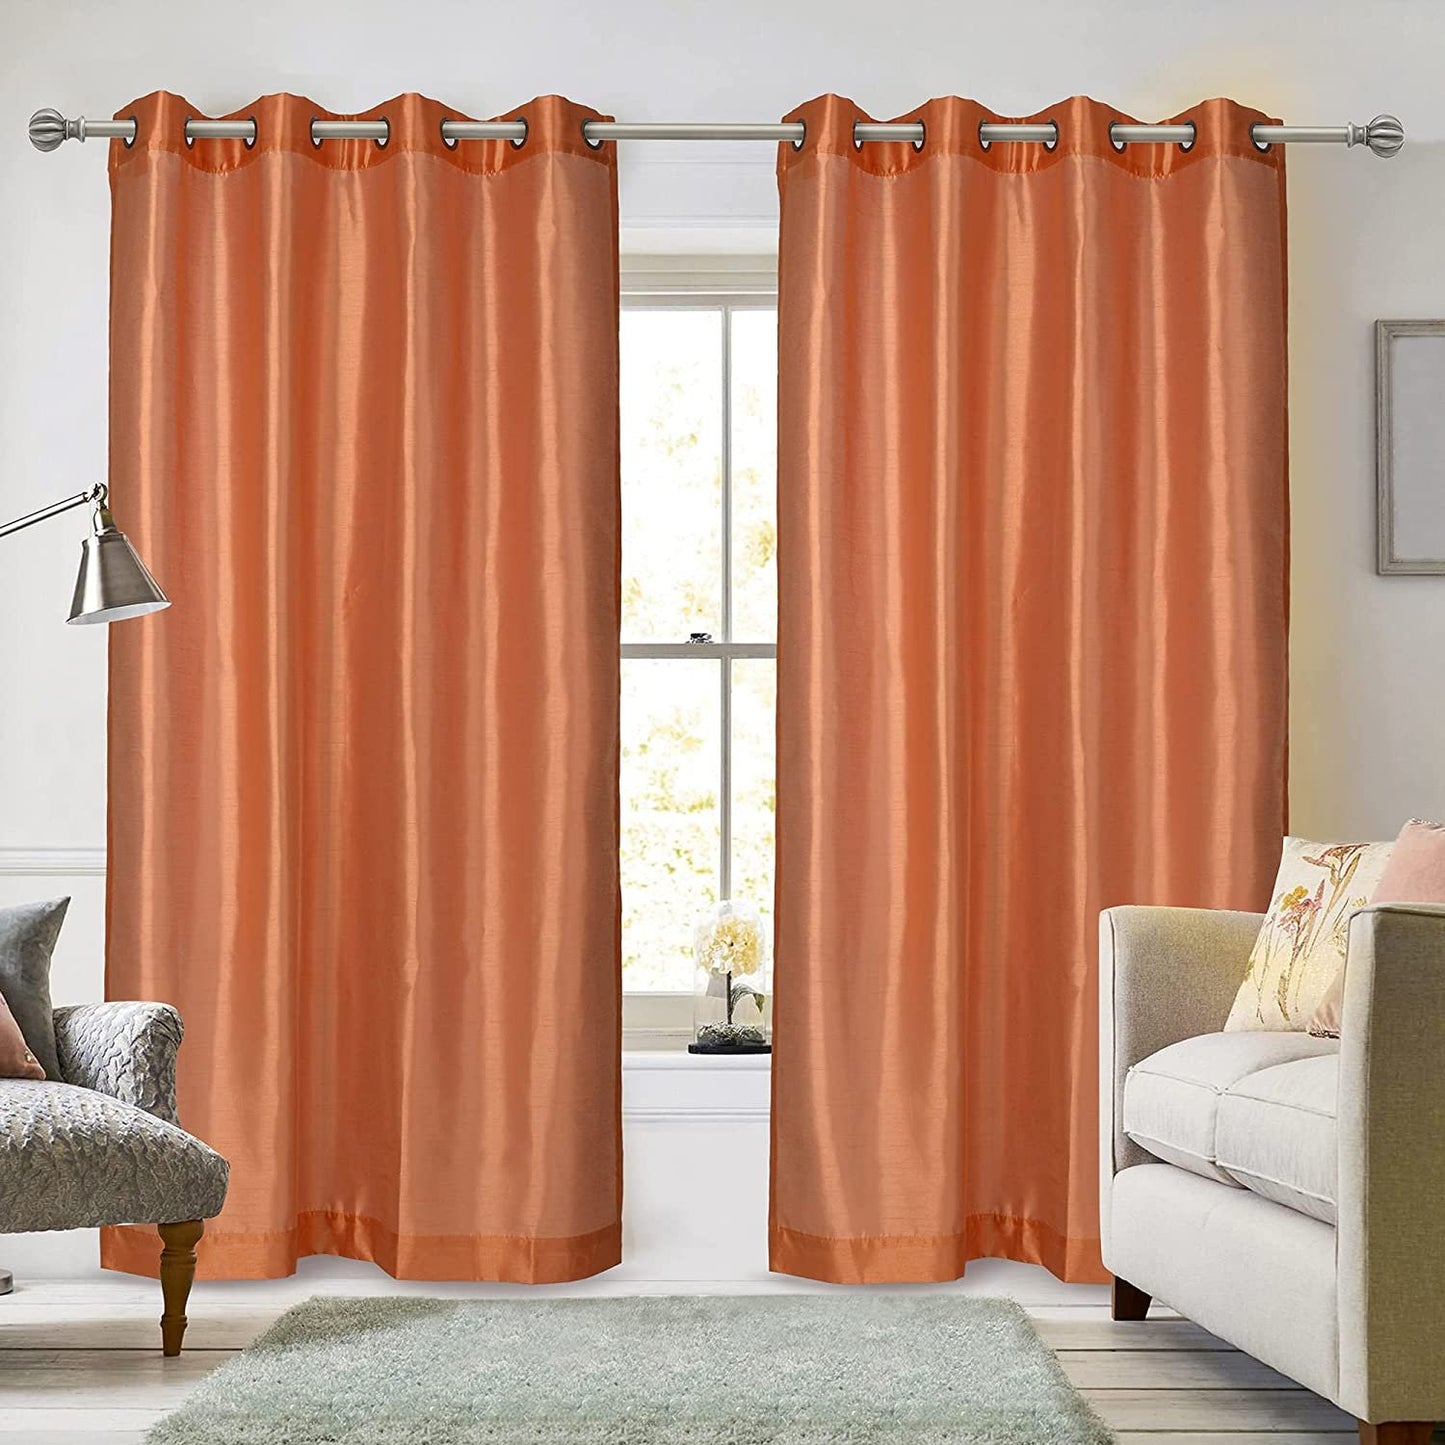 Ruthy's Textile 2 - Piece Semi Sheer Faux Silk Grommet Curtains Window Panels for Home Living Room/Bedroom - 54" by 84" Inch Long - Red